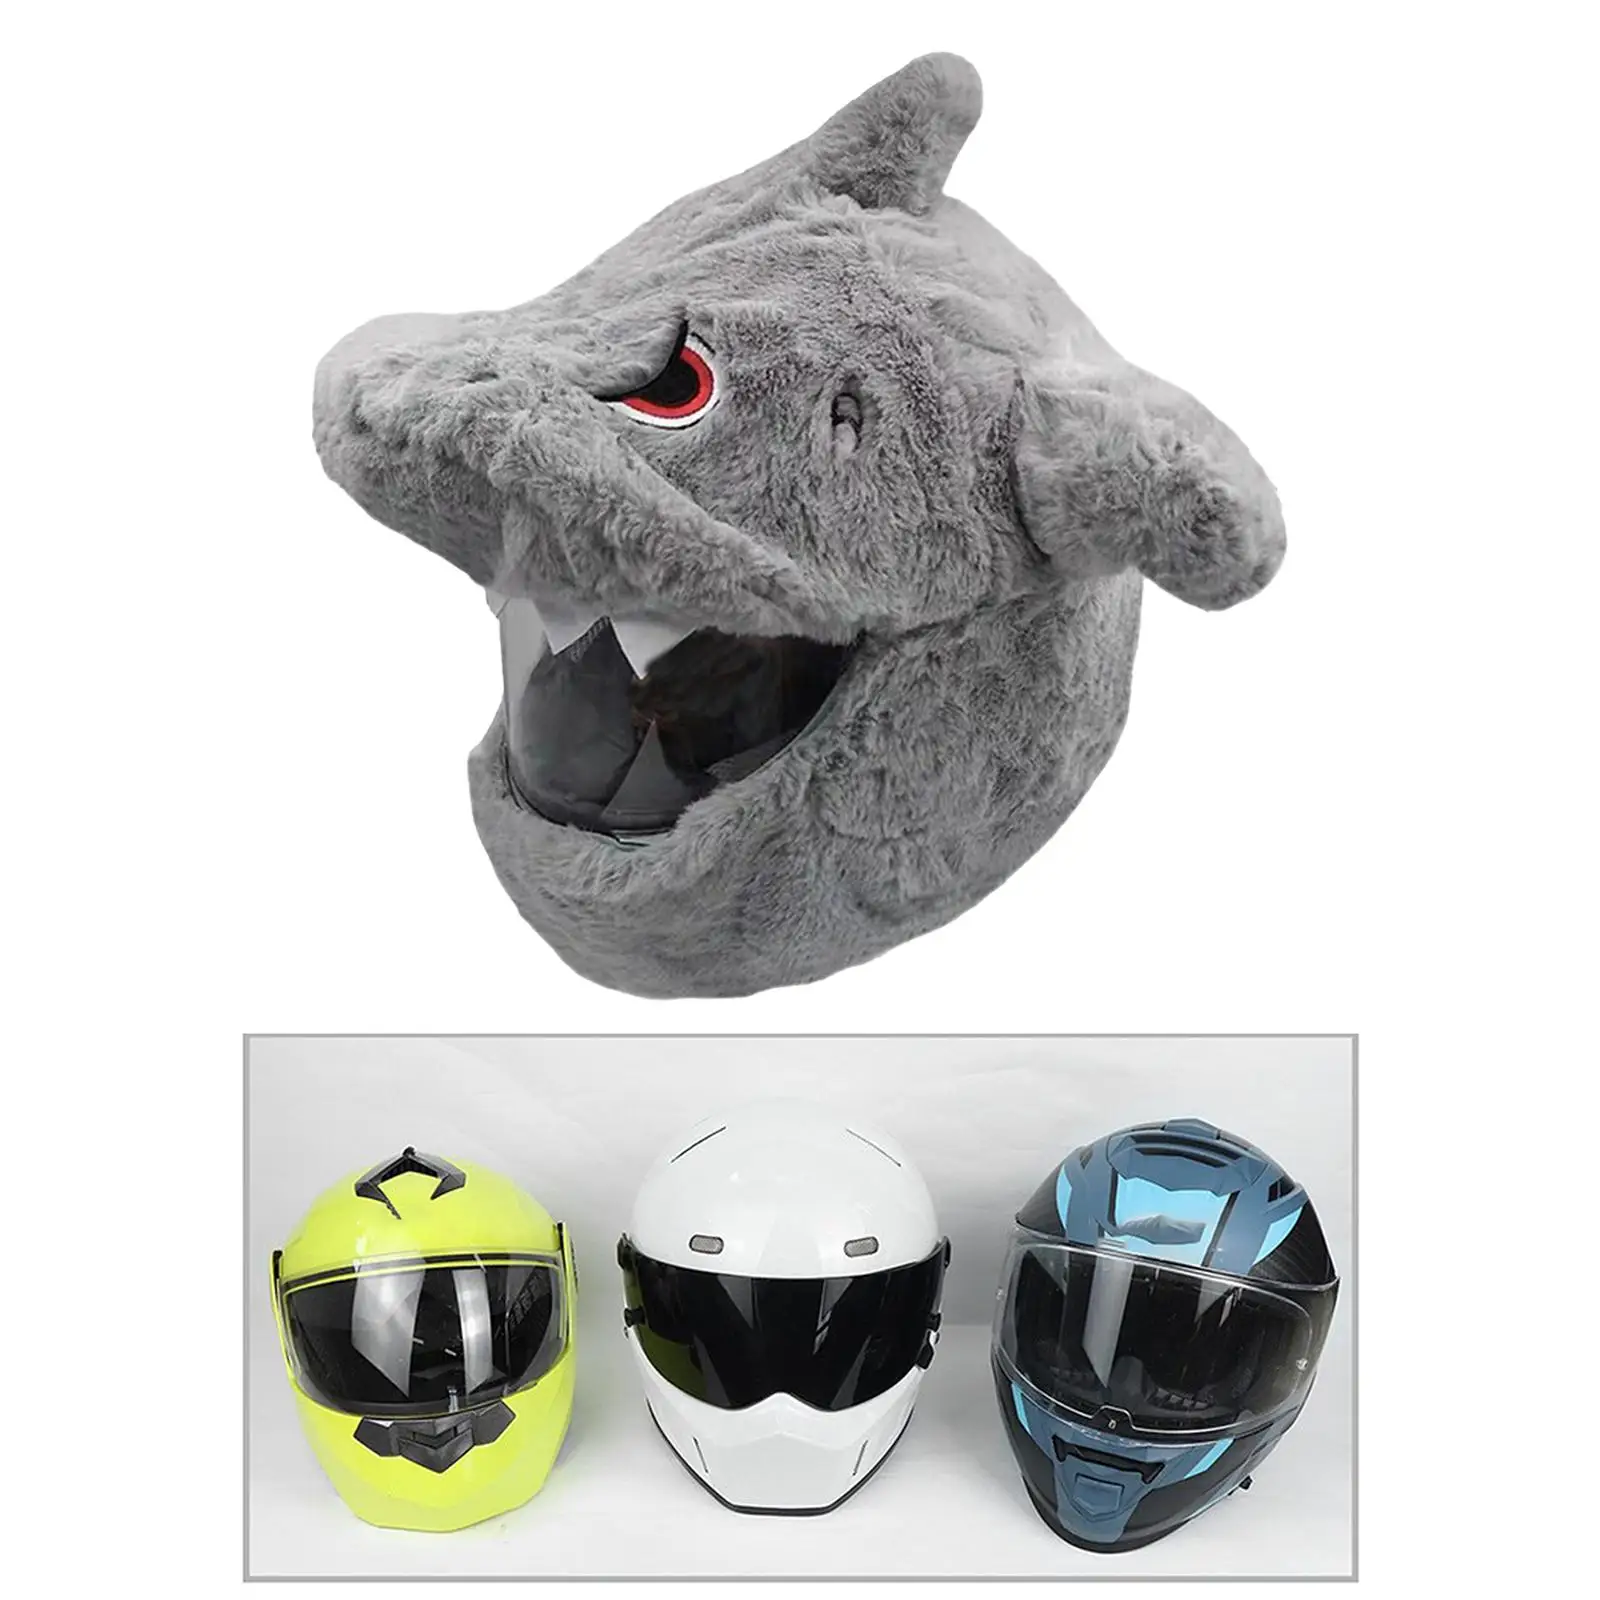 Motorcycle Helmet Cover Dust Cap Moto Gear Cute Helmet Accessory Plush Full Face Helmet Protective Cover for Girls and Boys